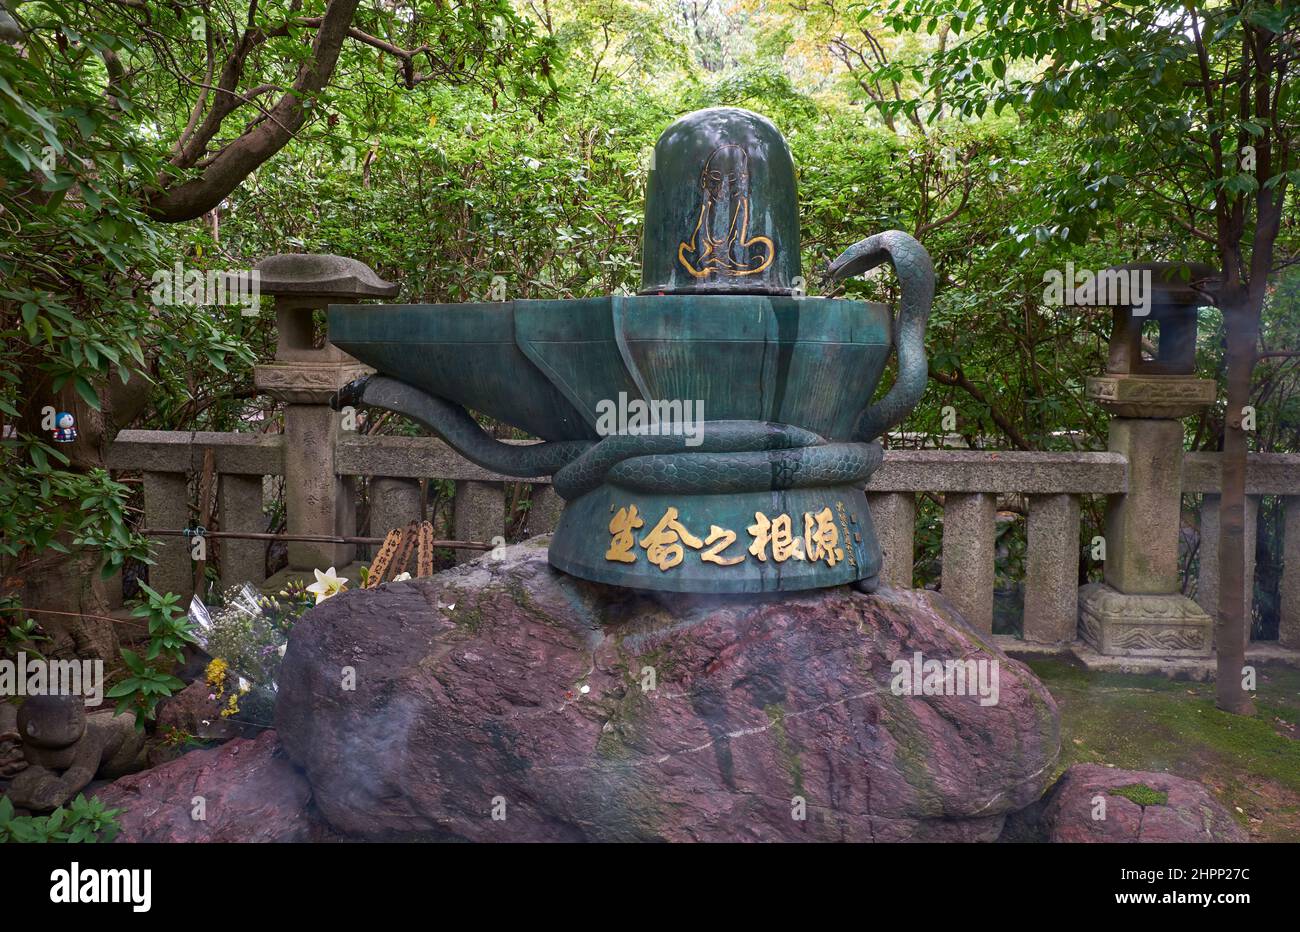 Nagoya, Japan – October 20, 2019: The bronze Shiva Linga in Toganji temple. The symbol of lingam-yoni, the union of the feminine and the masculine in Stock Photo